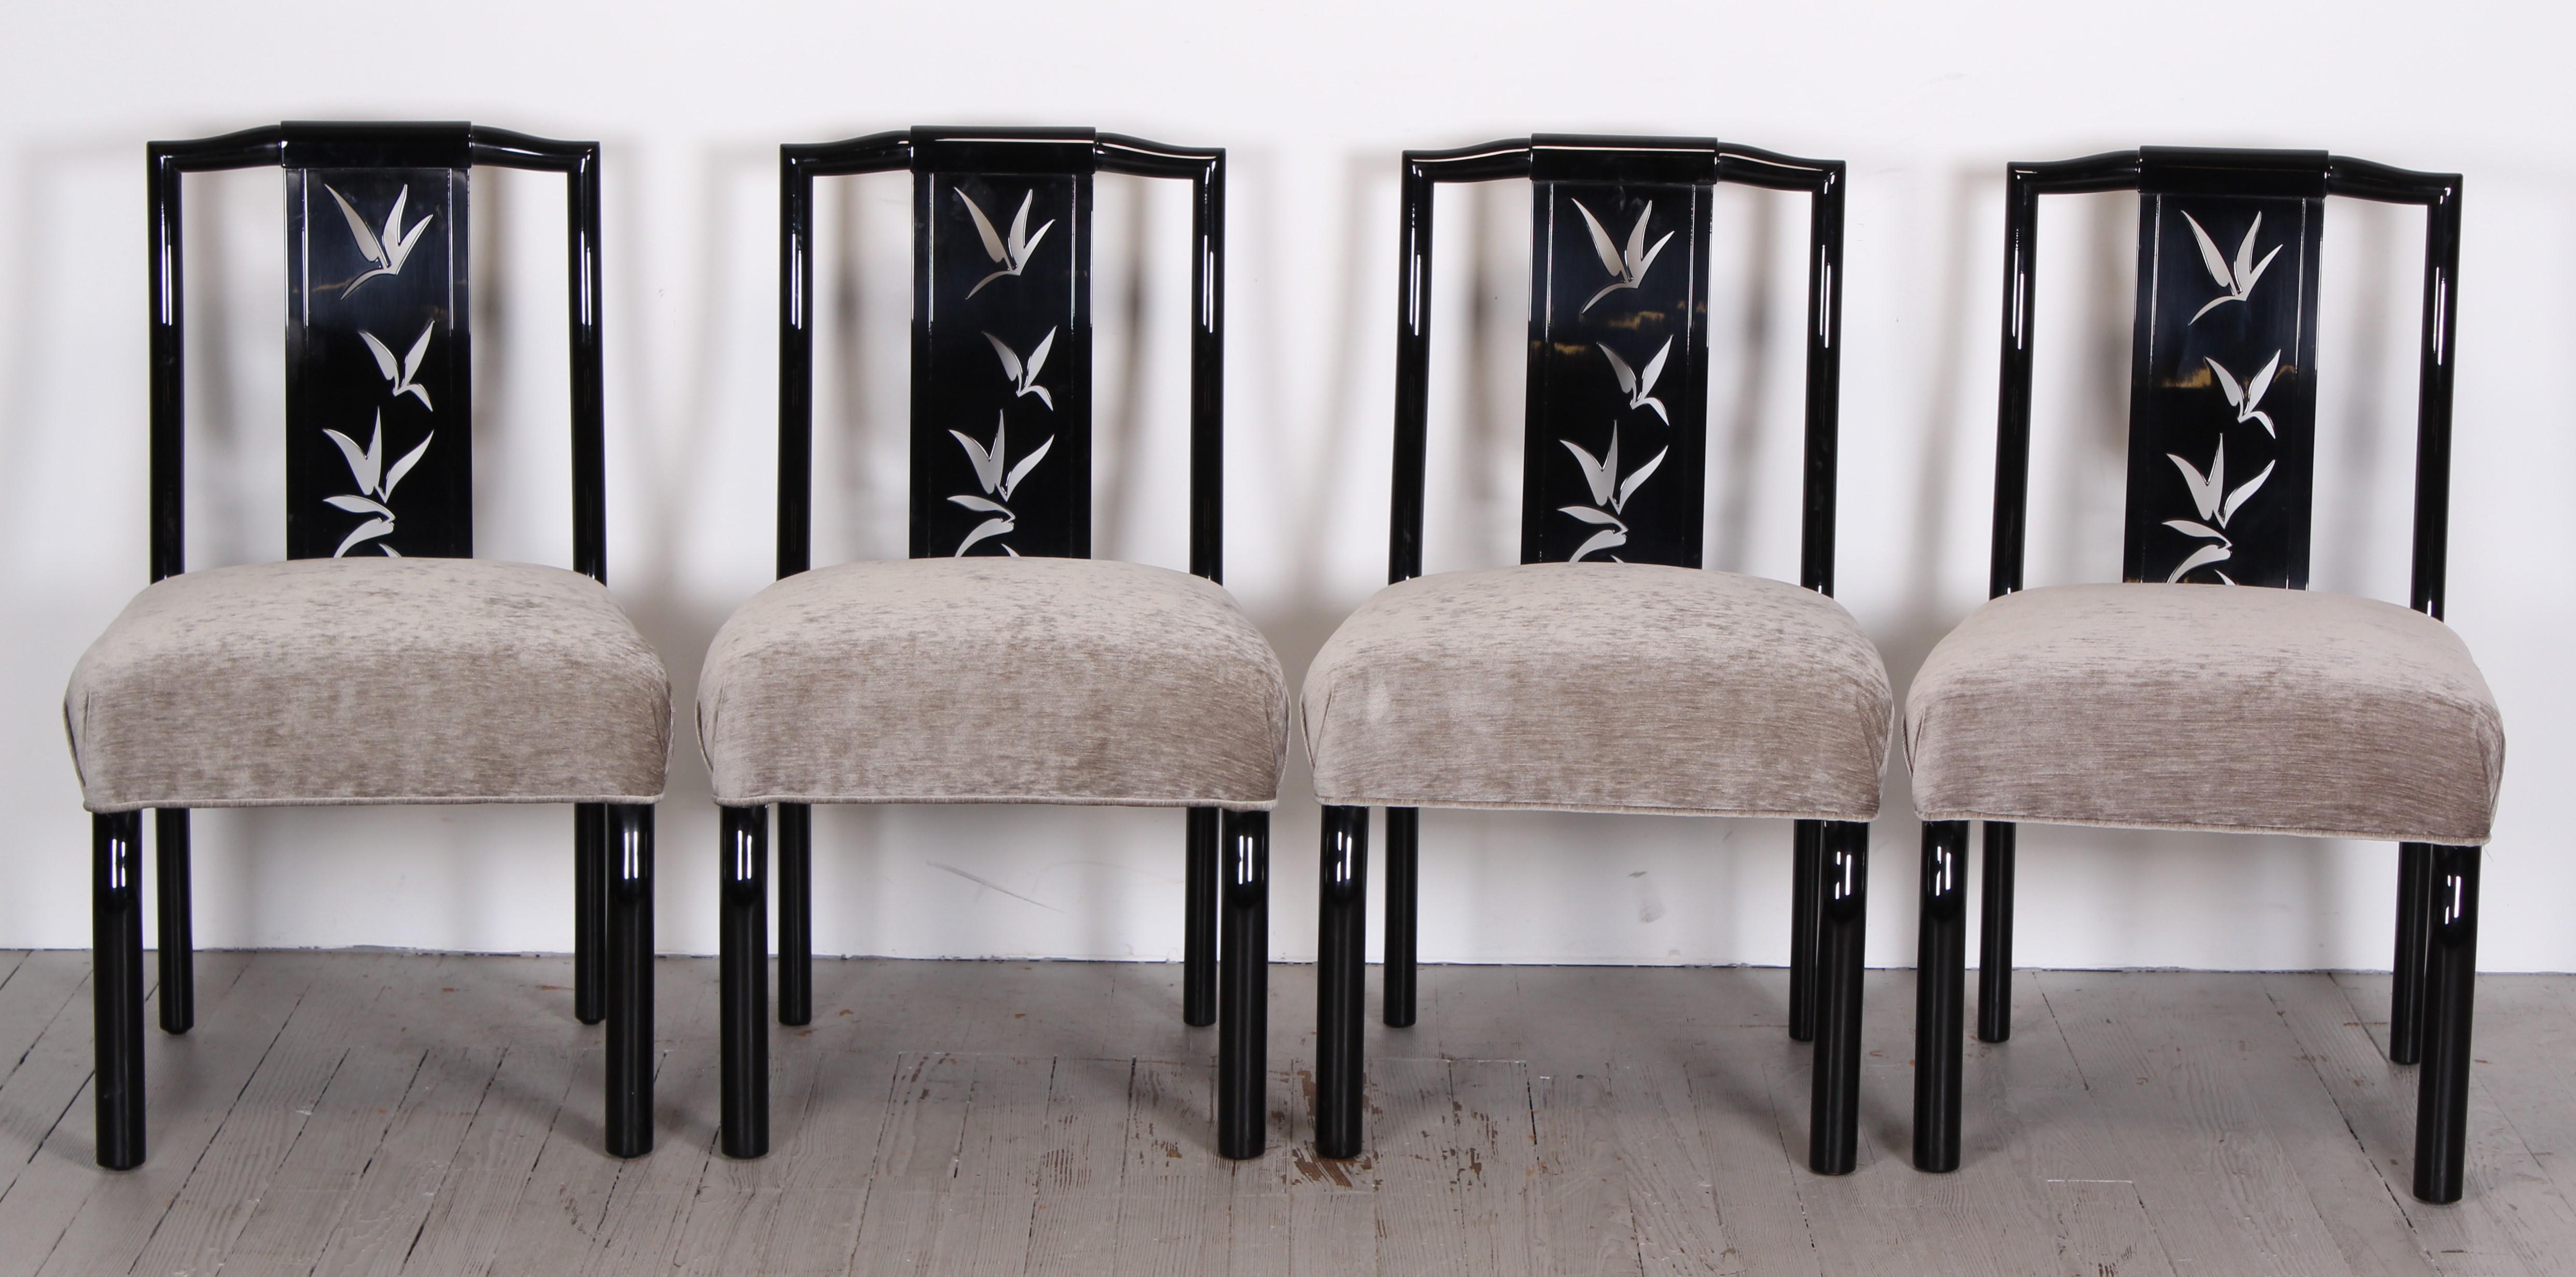 James Mont is a highly regarded designer. His bold designs stand out in a field of 'restrained modernism'. This set models an exotic motif influenced from his childhood in Istanbul. The eight chairs have newly tied springs, new 2 inch foam, and